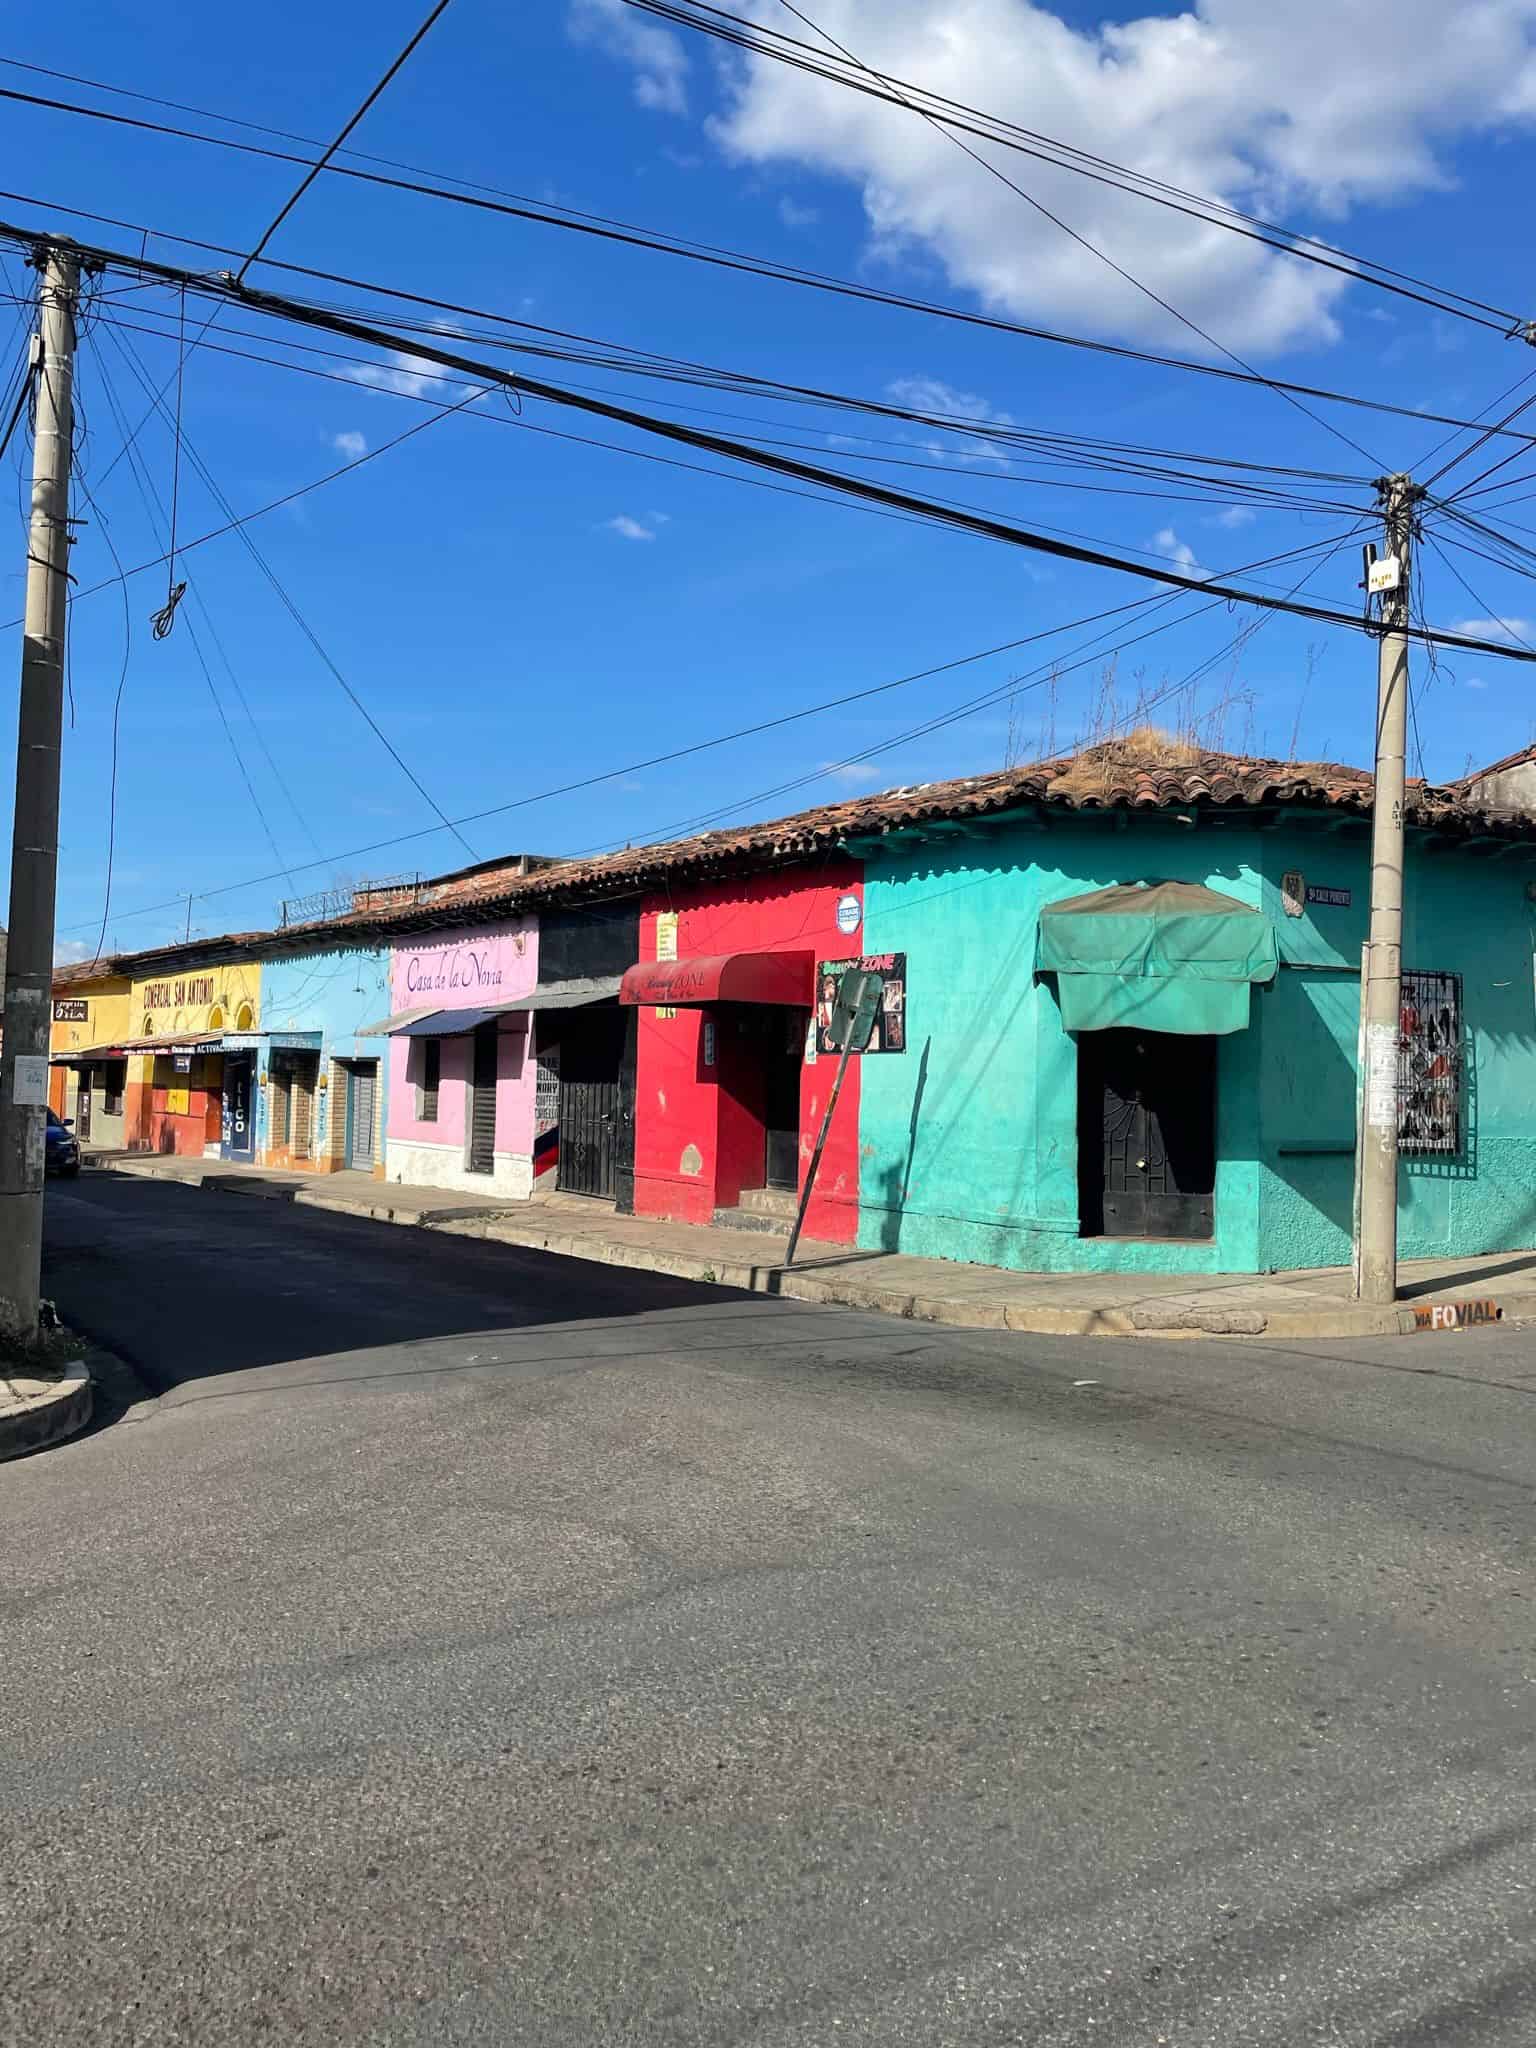 Colourful buildings in Santa Ana, El Salvador

From left to right: Yellow, blue, pink, red, turquoise